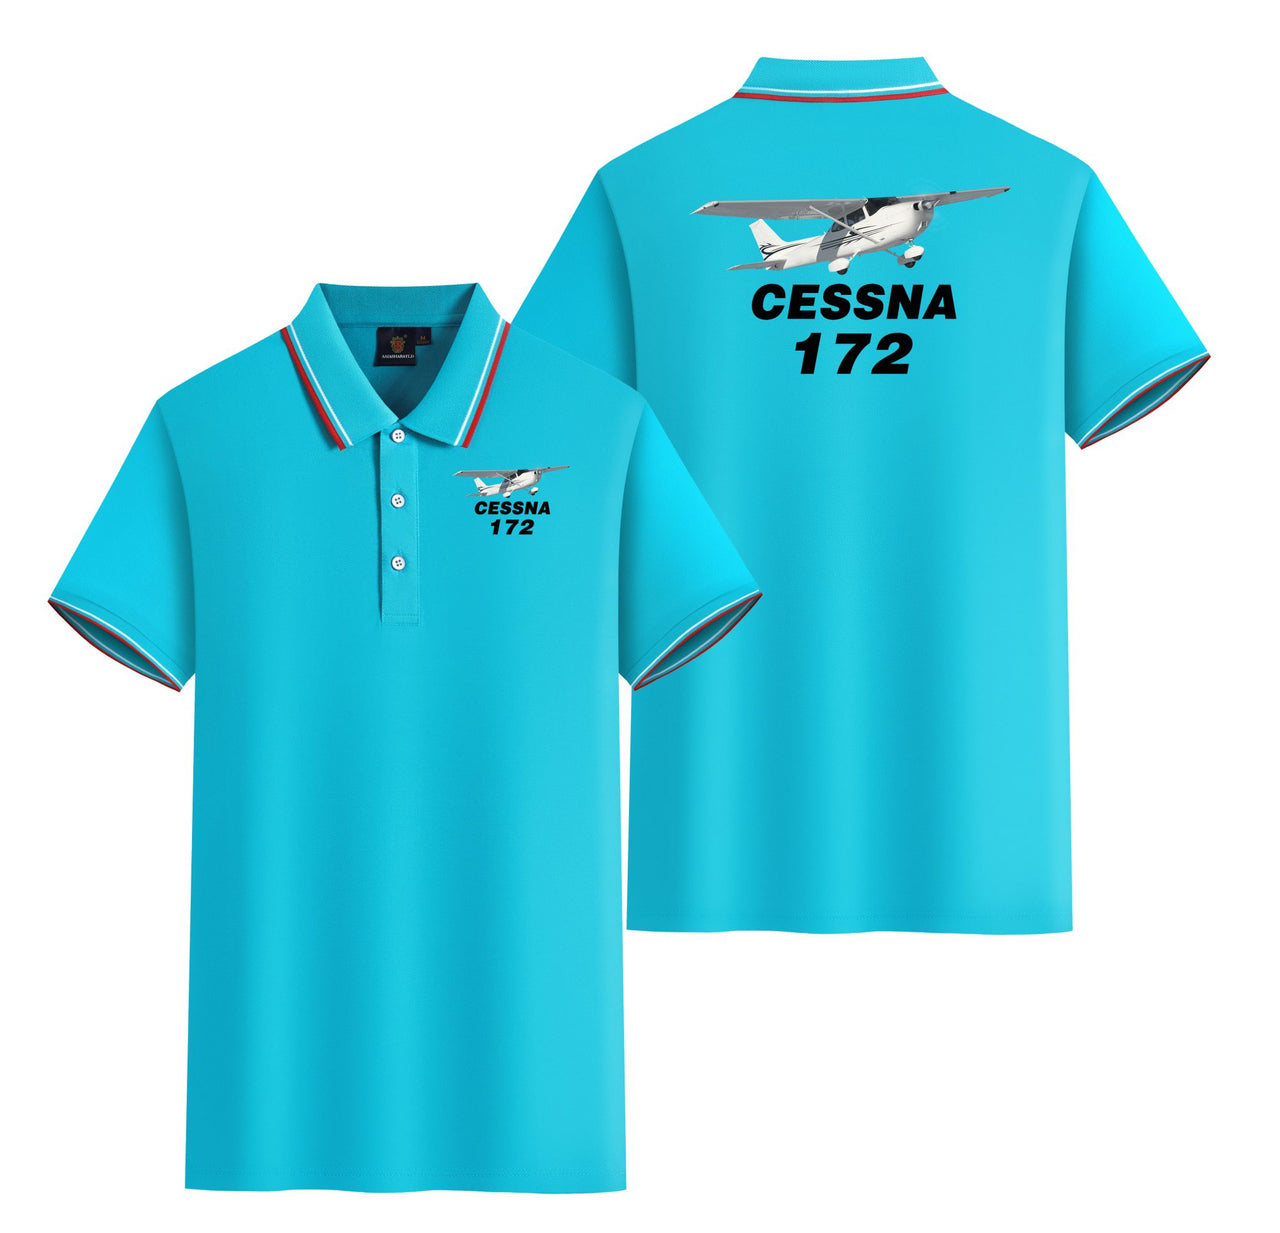 The Cessna 172 Designed Stylish Polo T-Shirts (Double-Side)